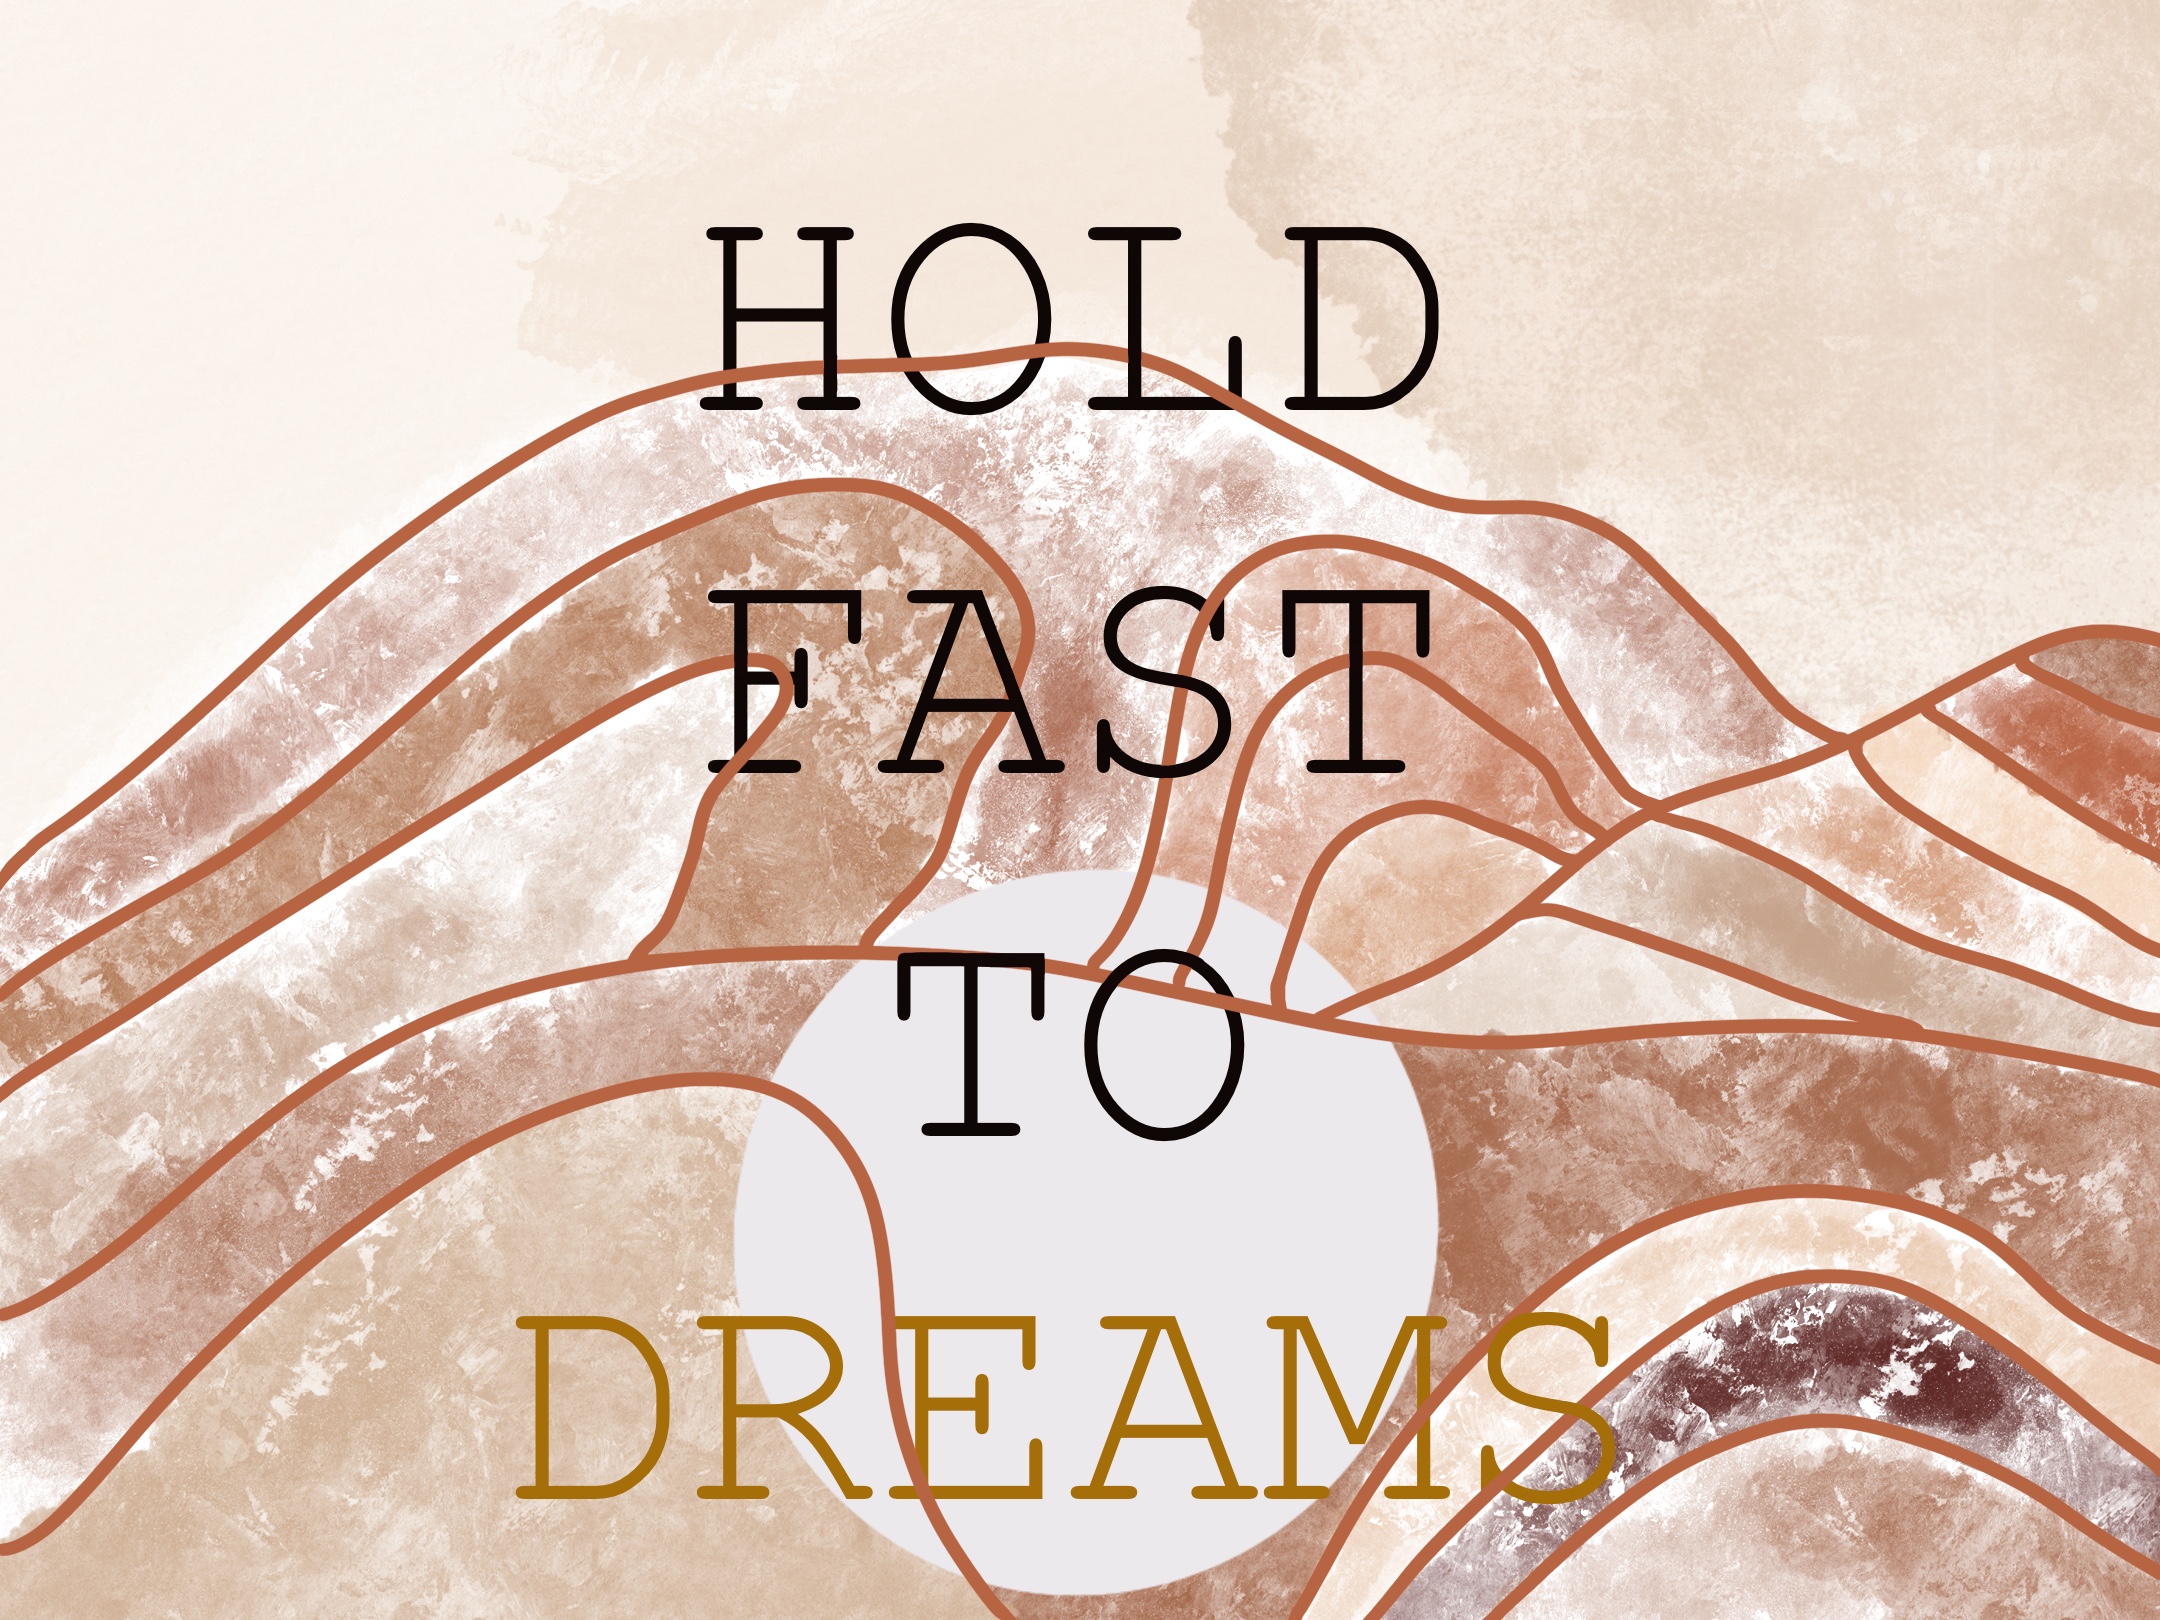 PSLF Bill Updates Are Coming! - Hold Fast To Dreams